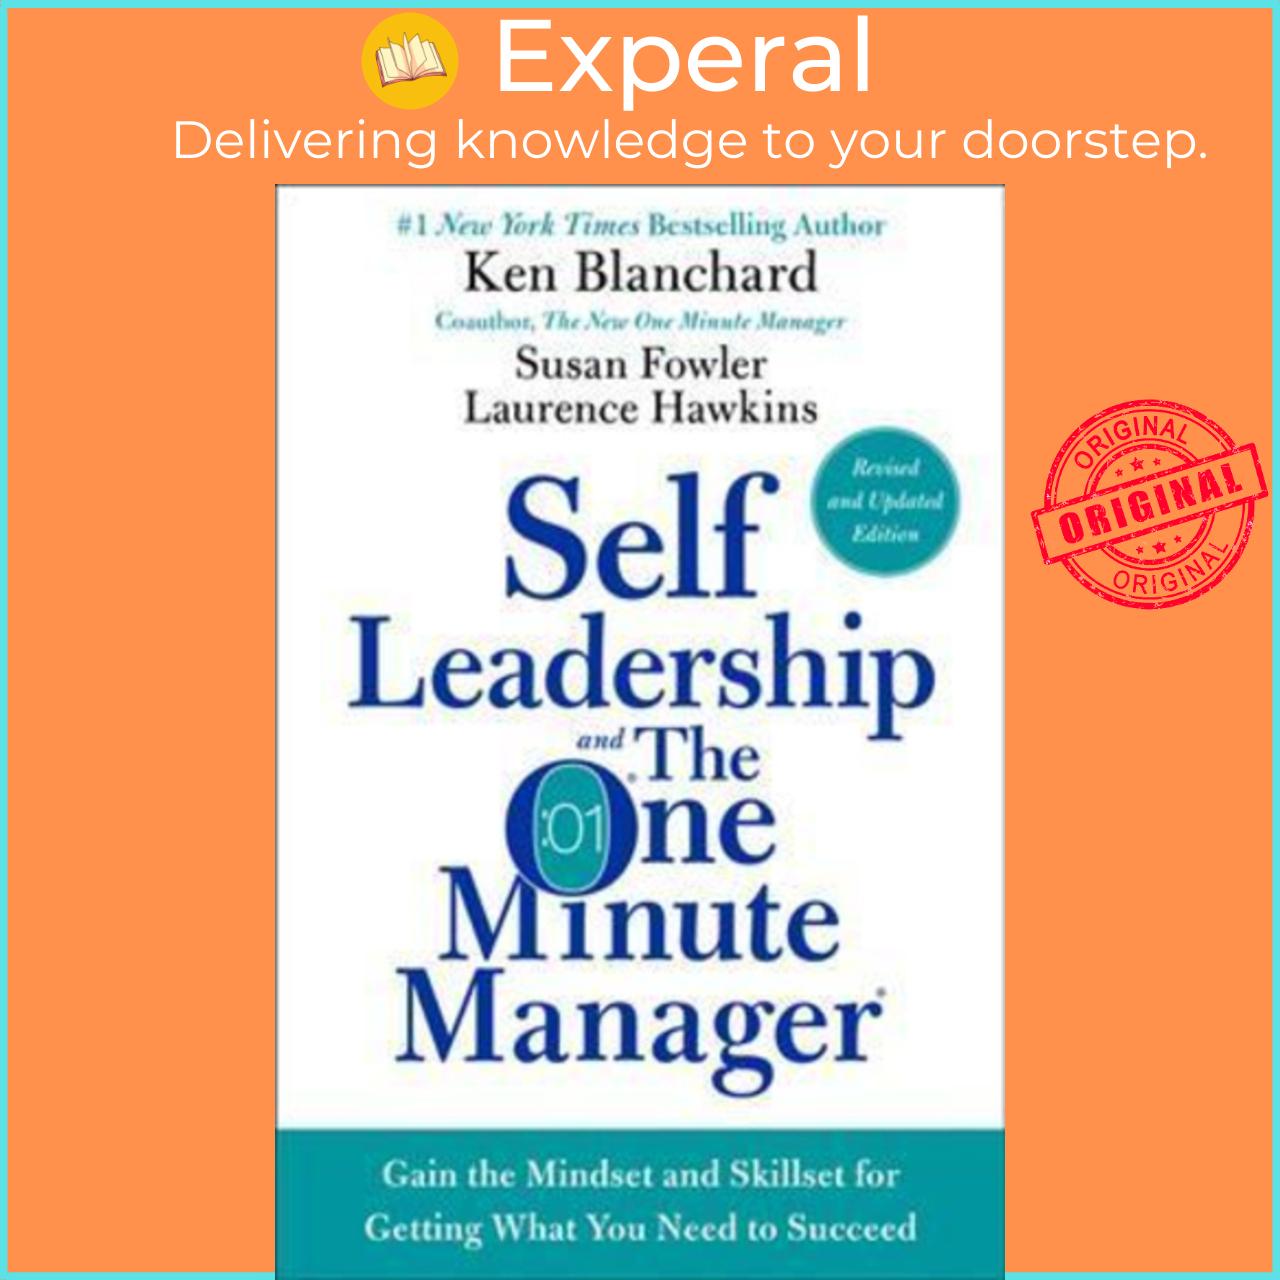 Sách - Self Leadership and the One Minute Manager by Ken Blanchard,Susan Fowler,Laurence Hawkins (US edition, hardcover)